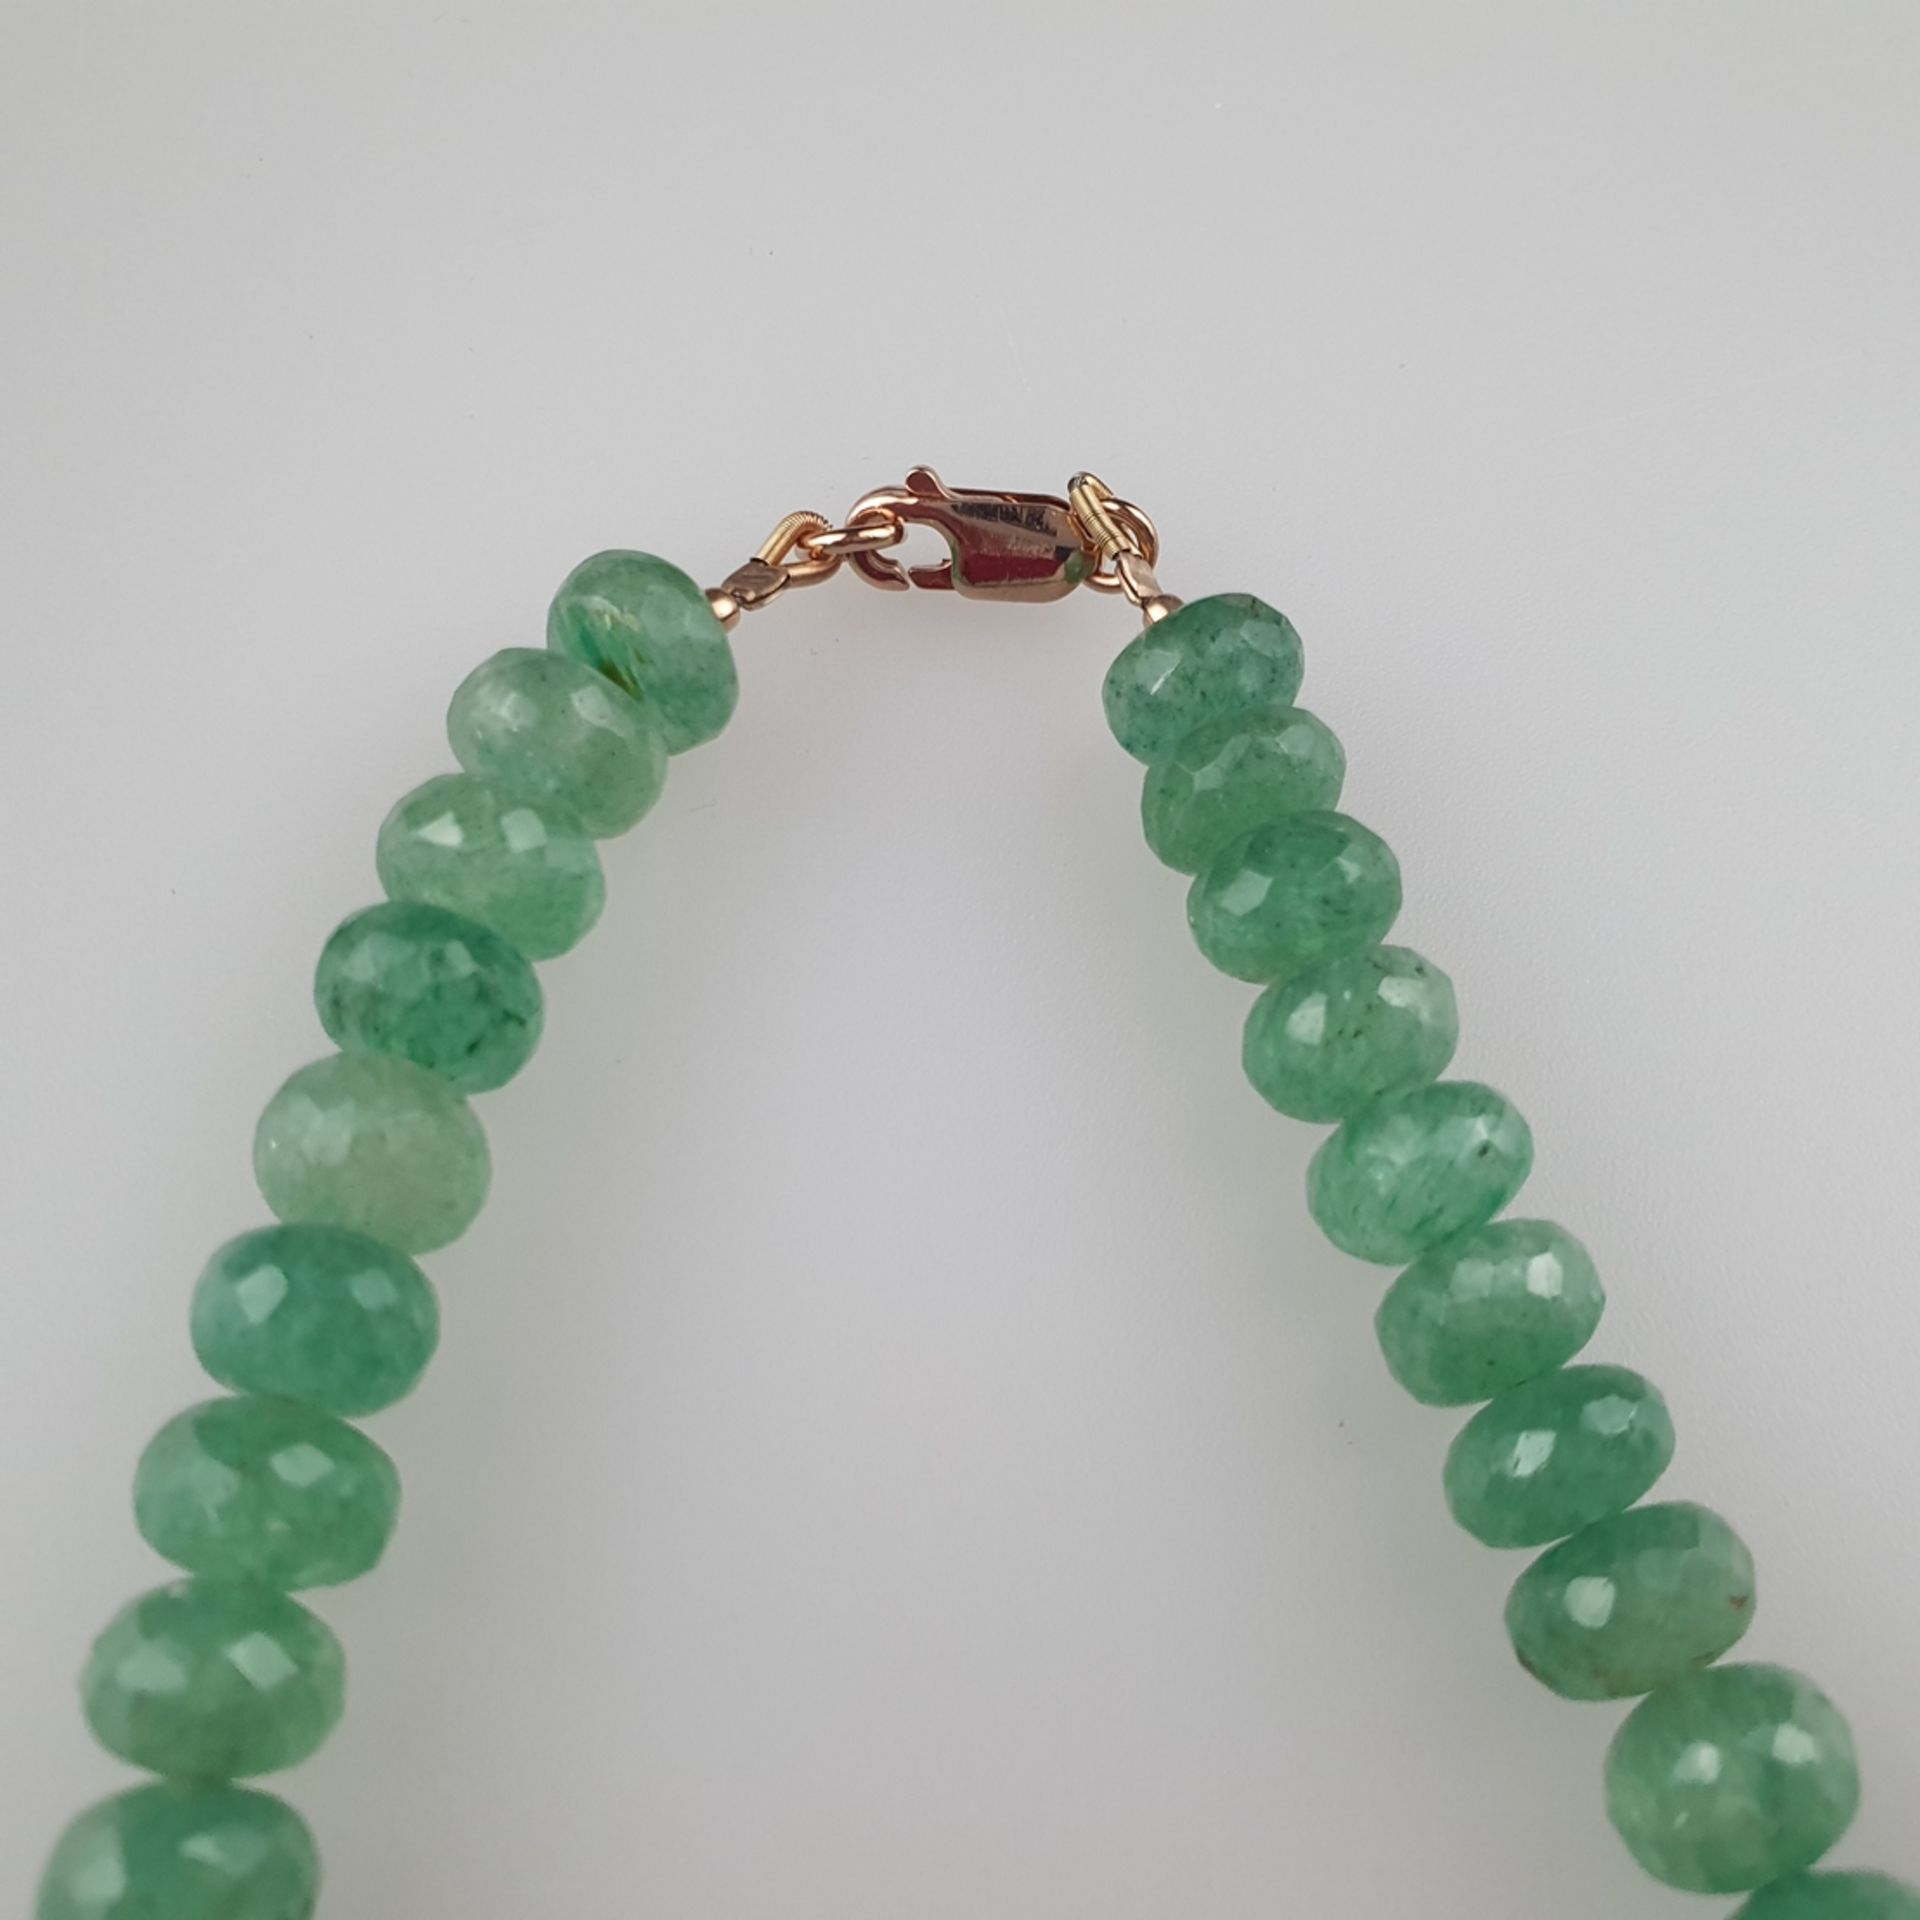 258cts Faceted Beryl Emerald Beads Necklace, L. ca. 45 cm,  ca. 50 Gramm - Image 5 of 6